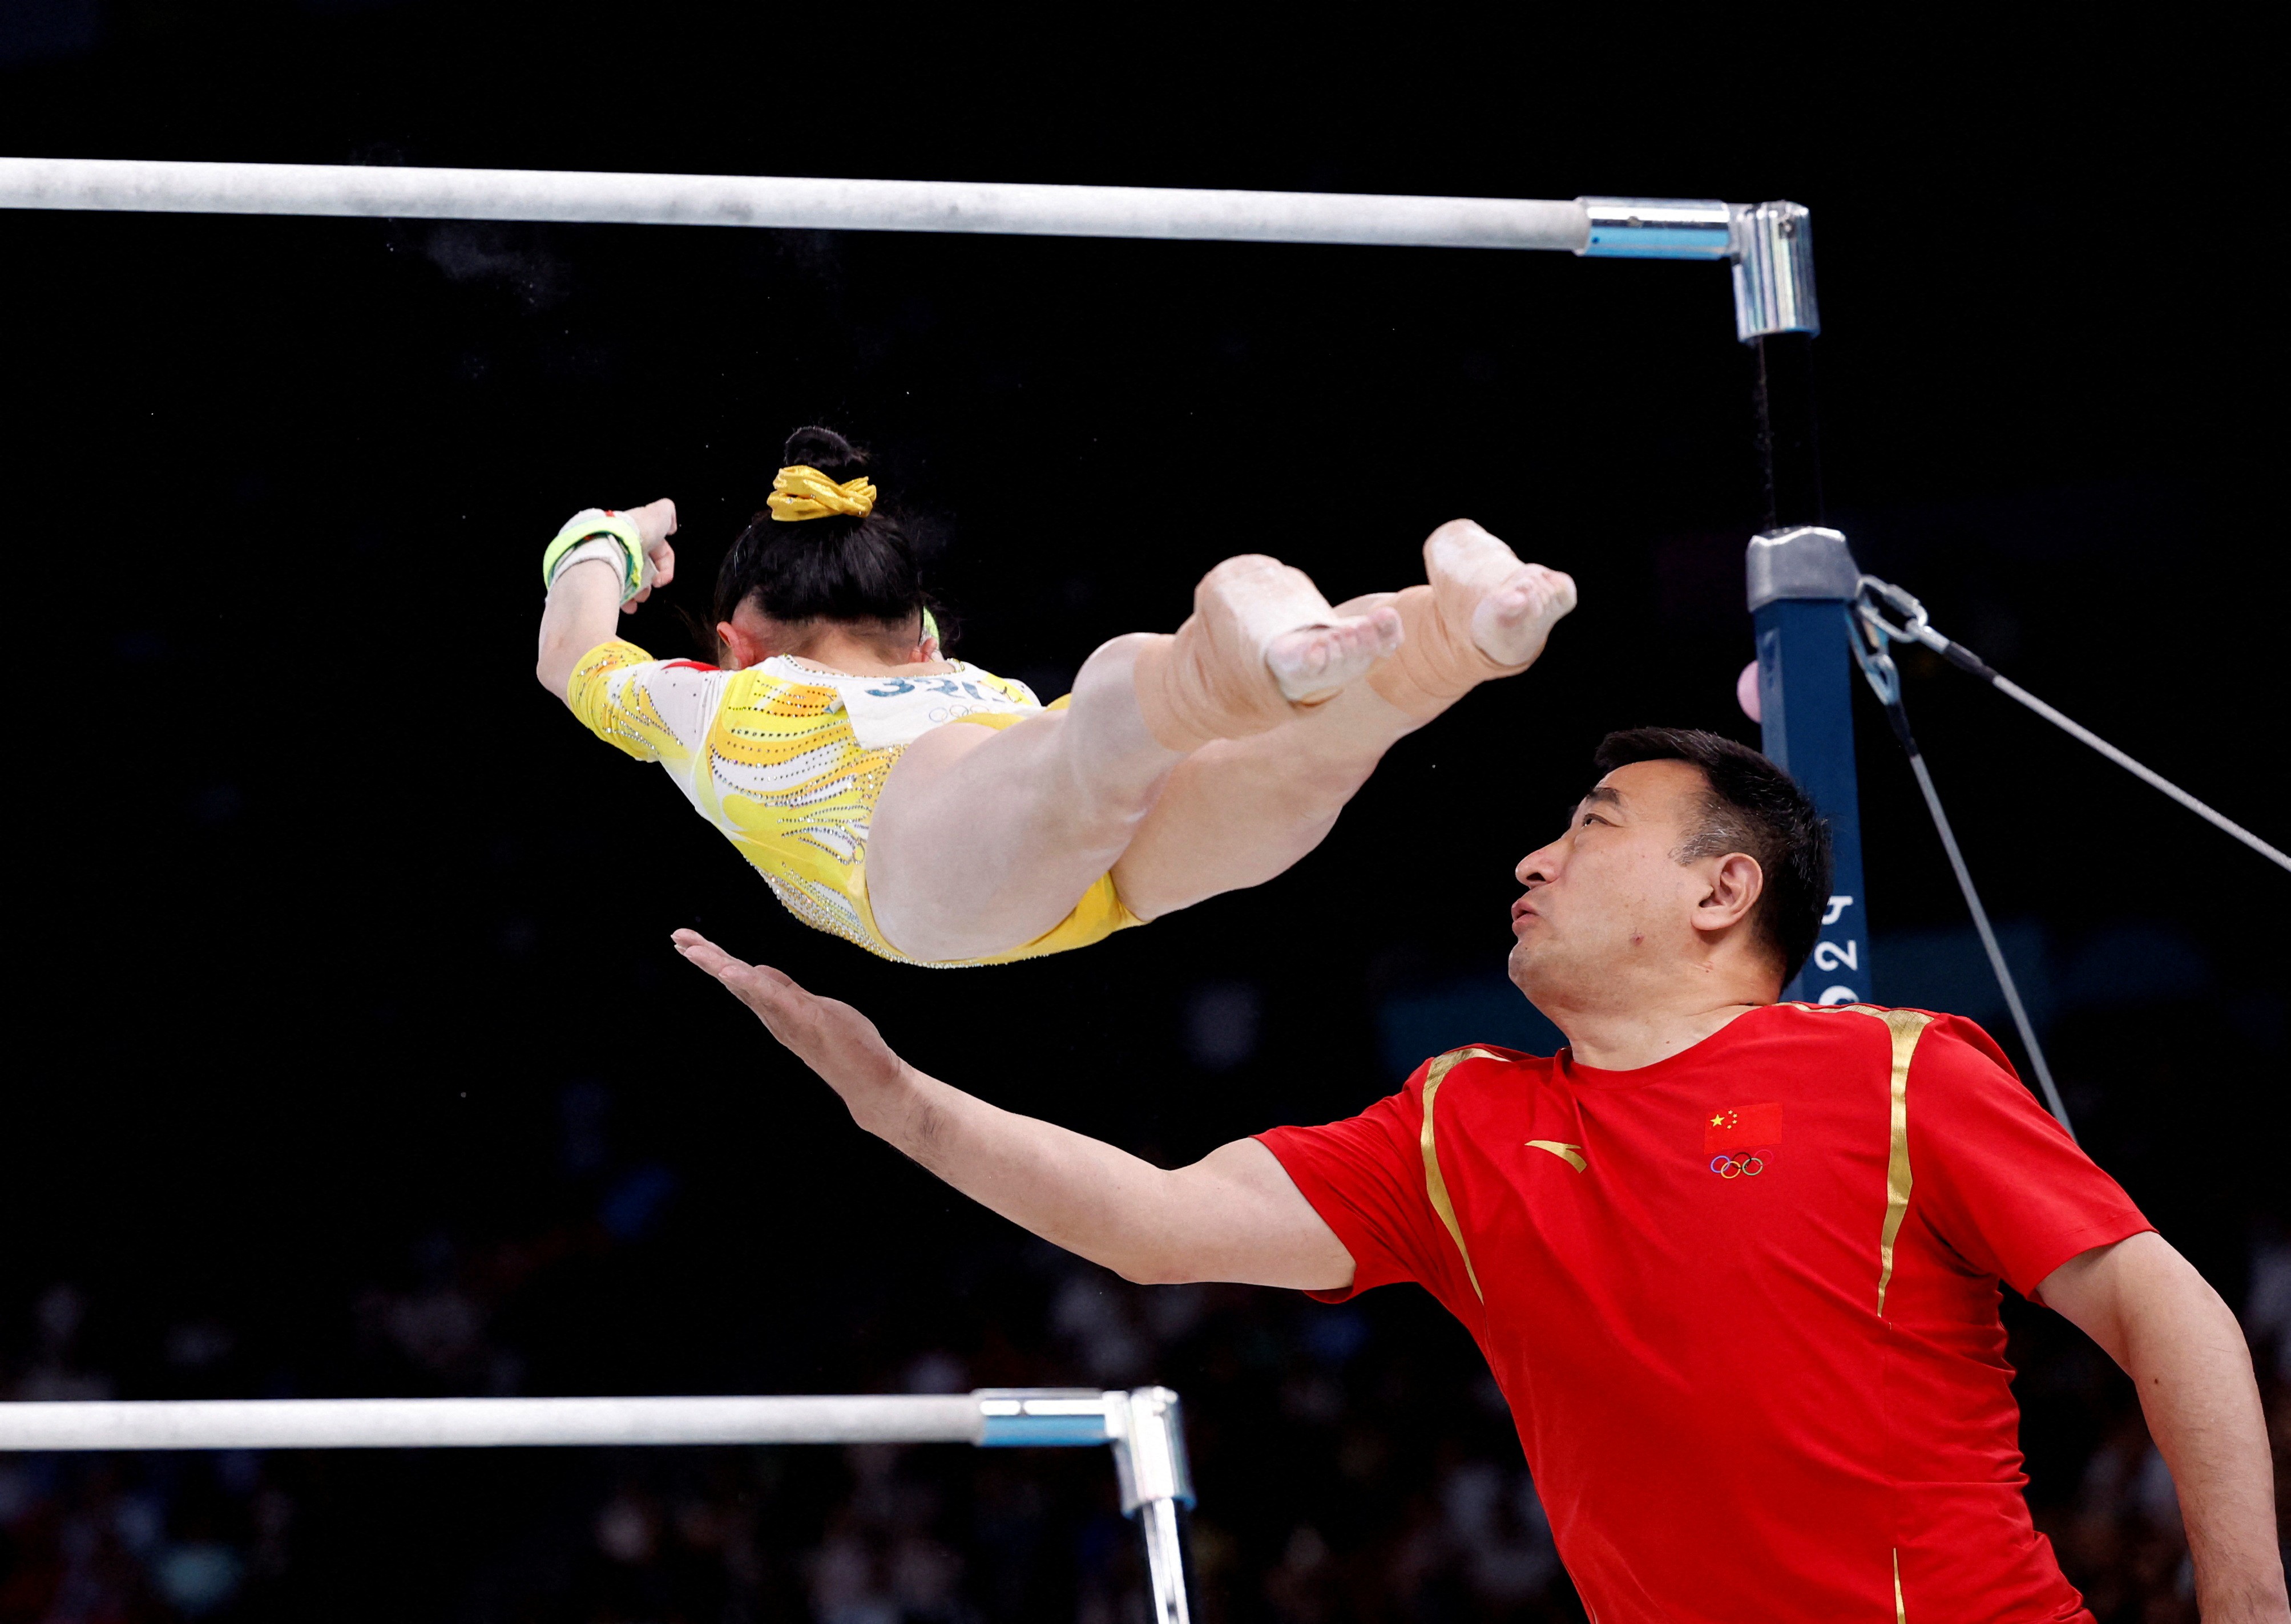 A gymnast falls face-down from a high bar she had been swinging from, as a coach reaches out one arm to slow her fall.